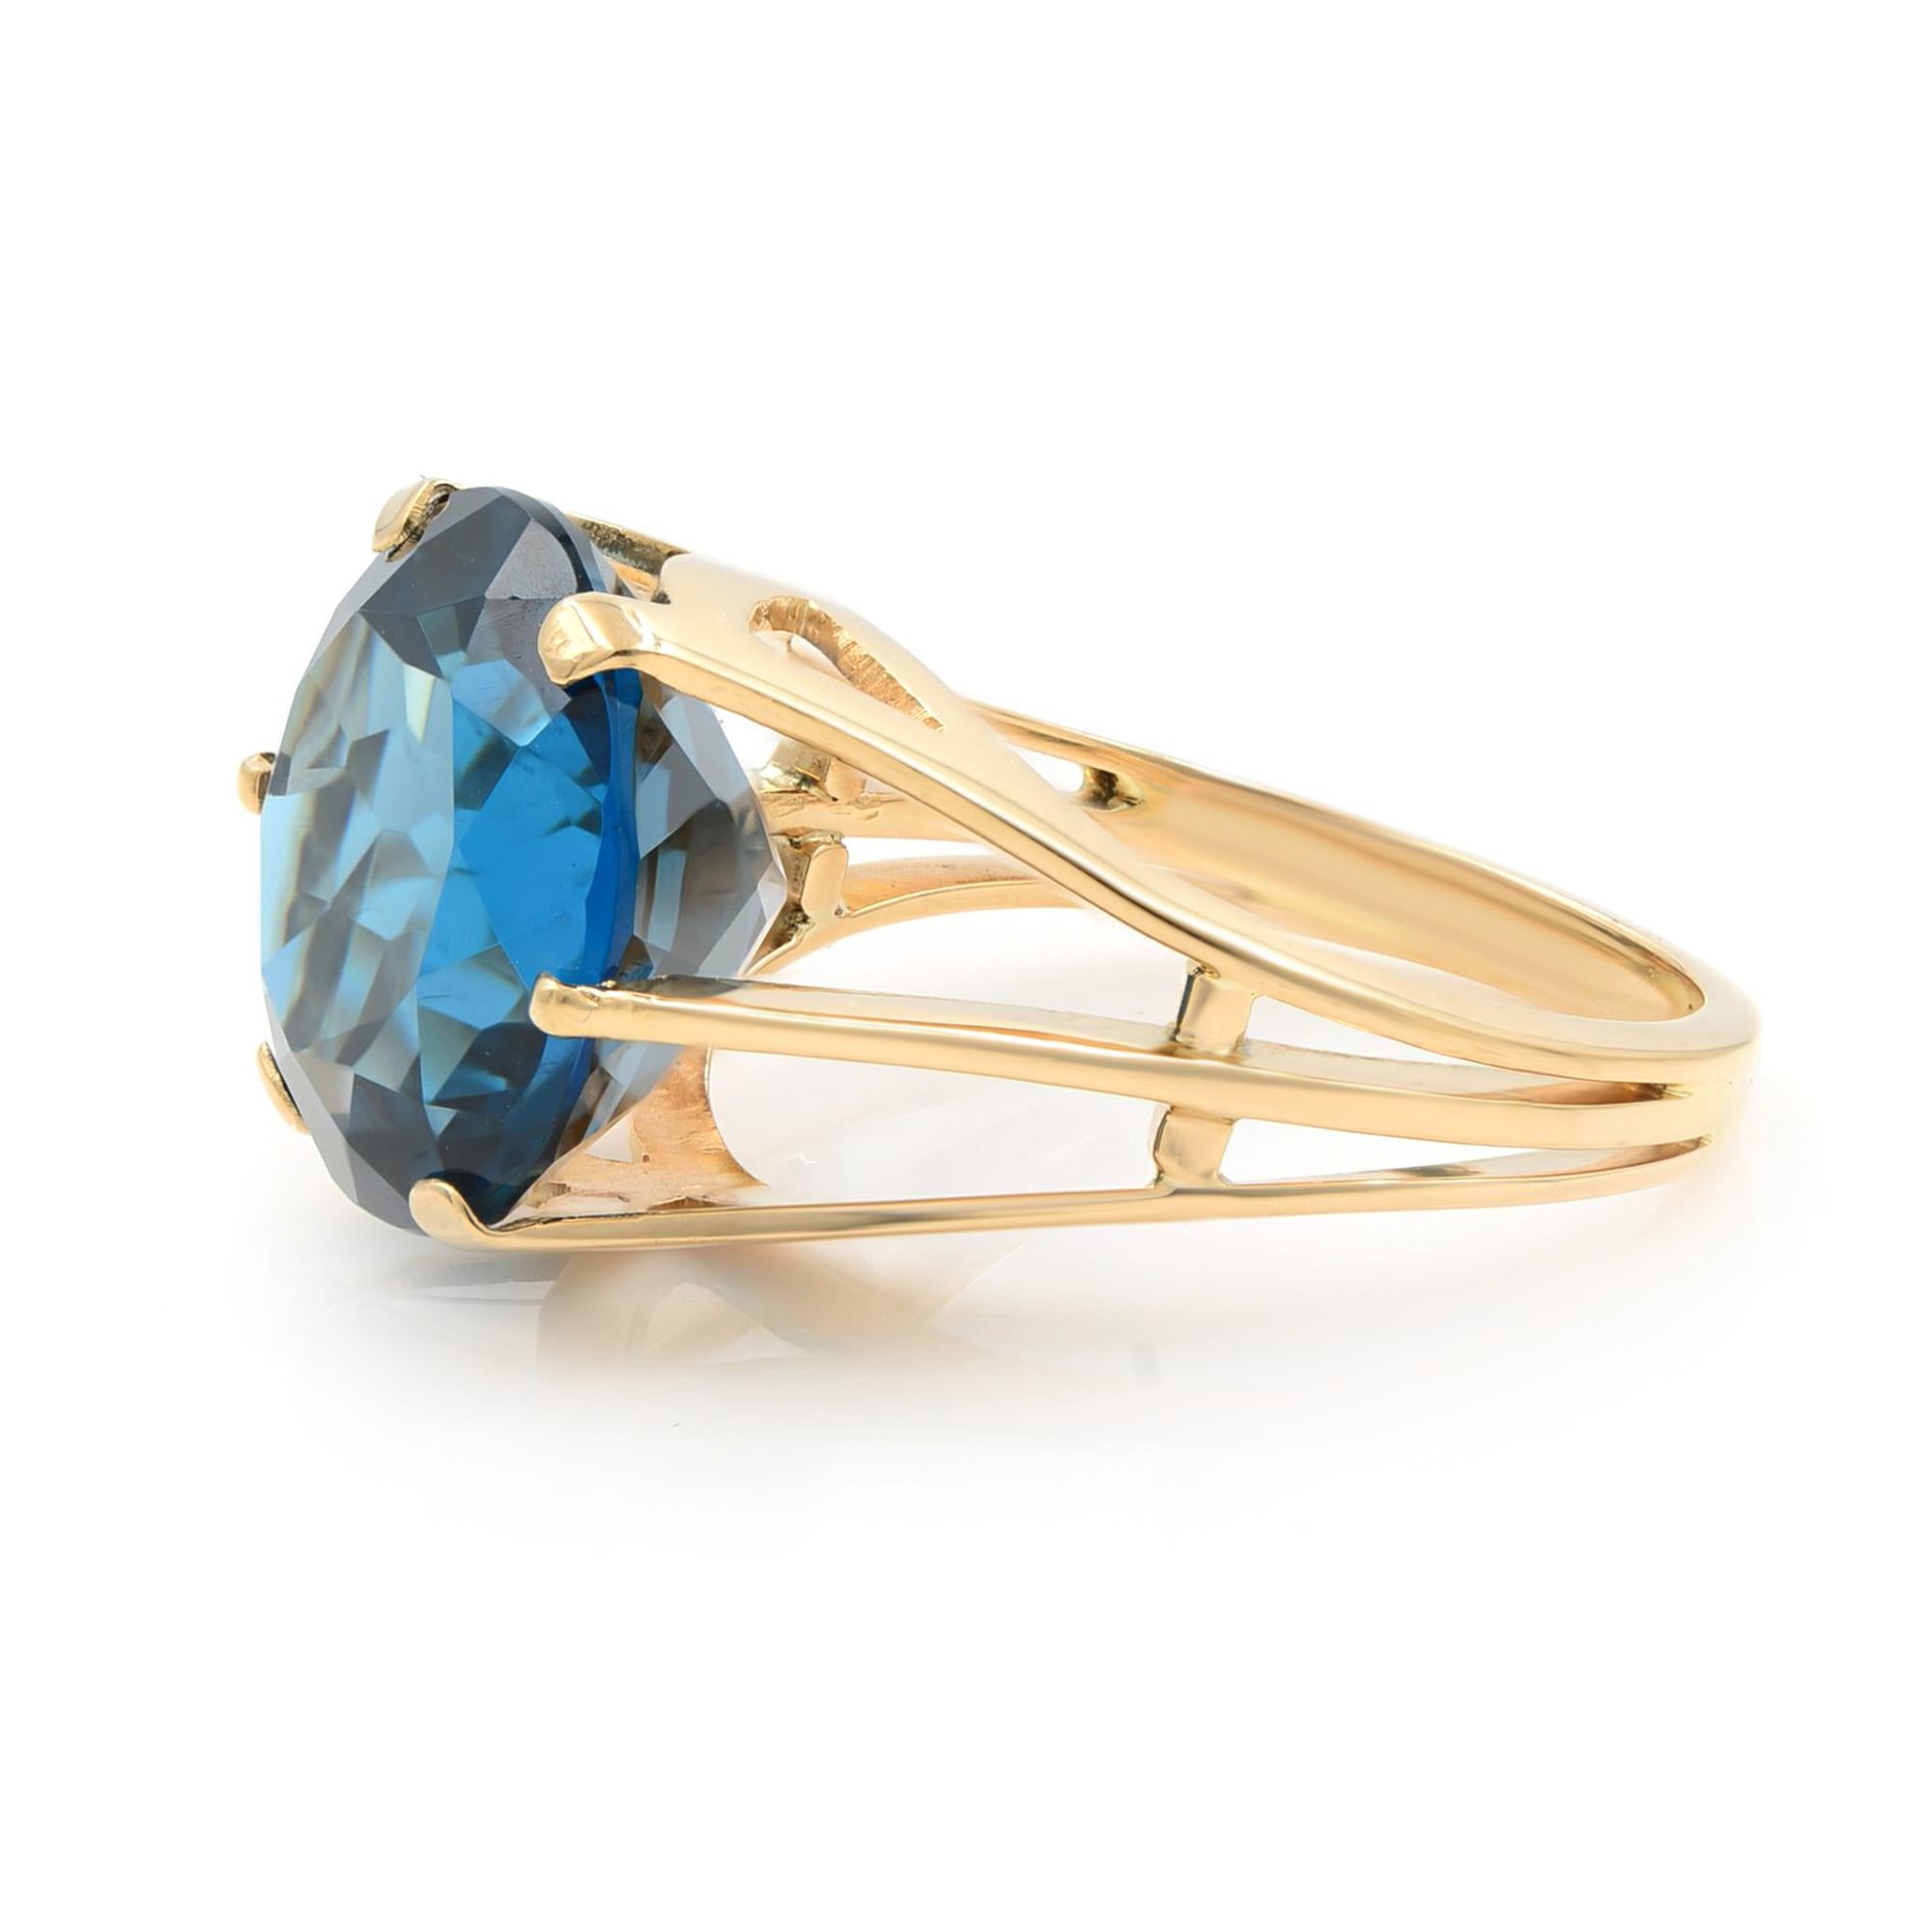 An enchanting gemstone, an elegantly fashioned faceted round London blue topaz, weighing 8.50 carats and suffused with a bright ocean hue, glistens and glow in this charming estate jewel. Rendered in gleaming rose gold and finished with an open